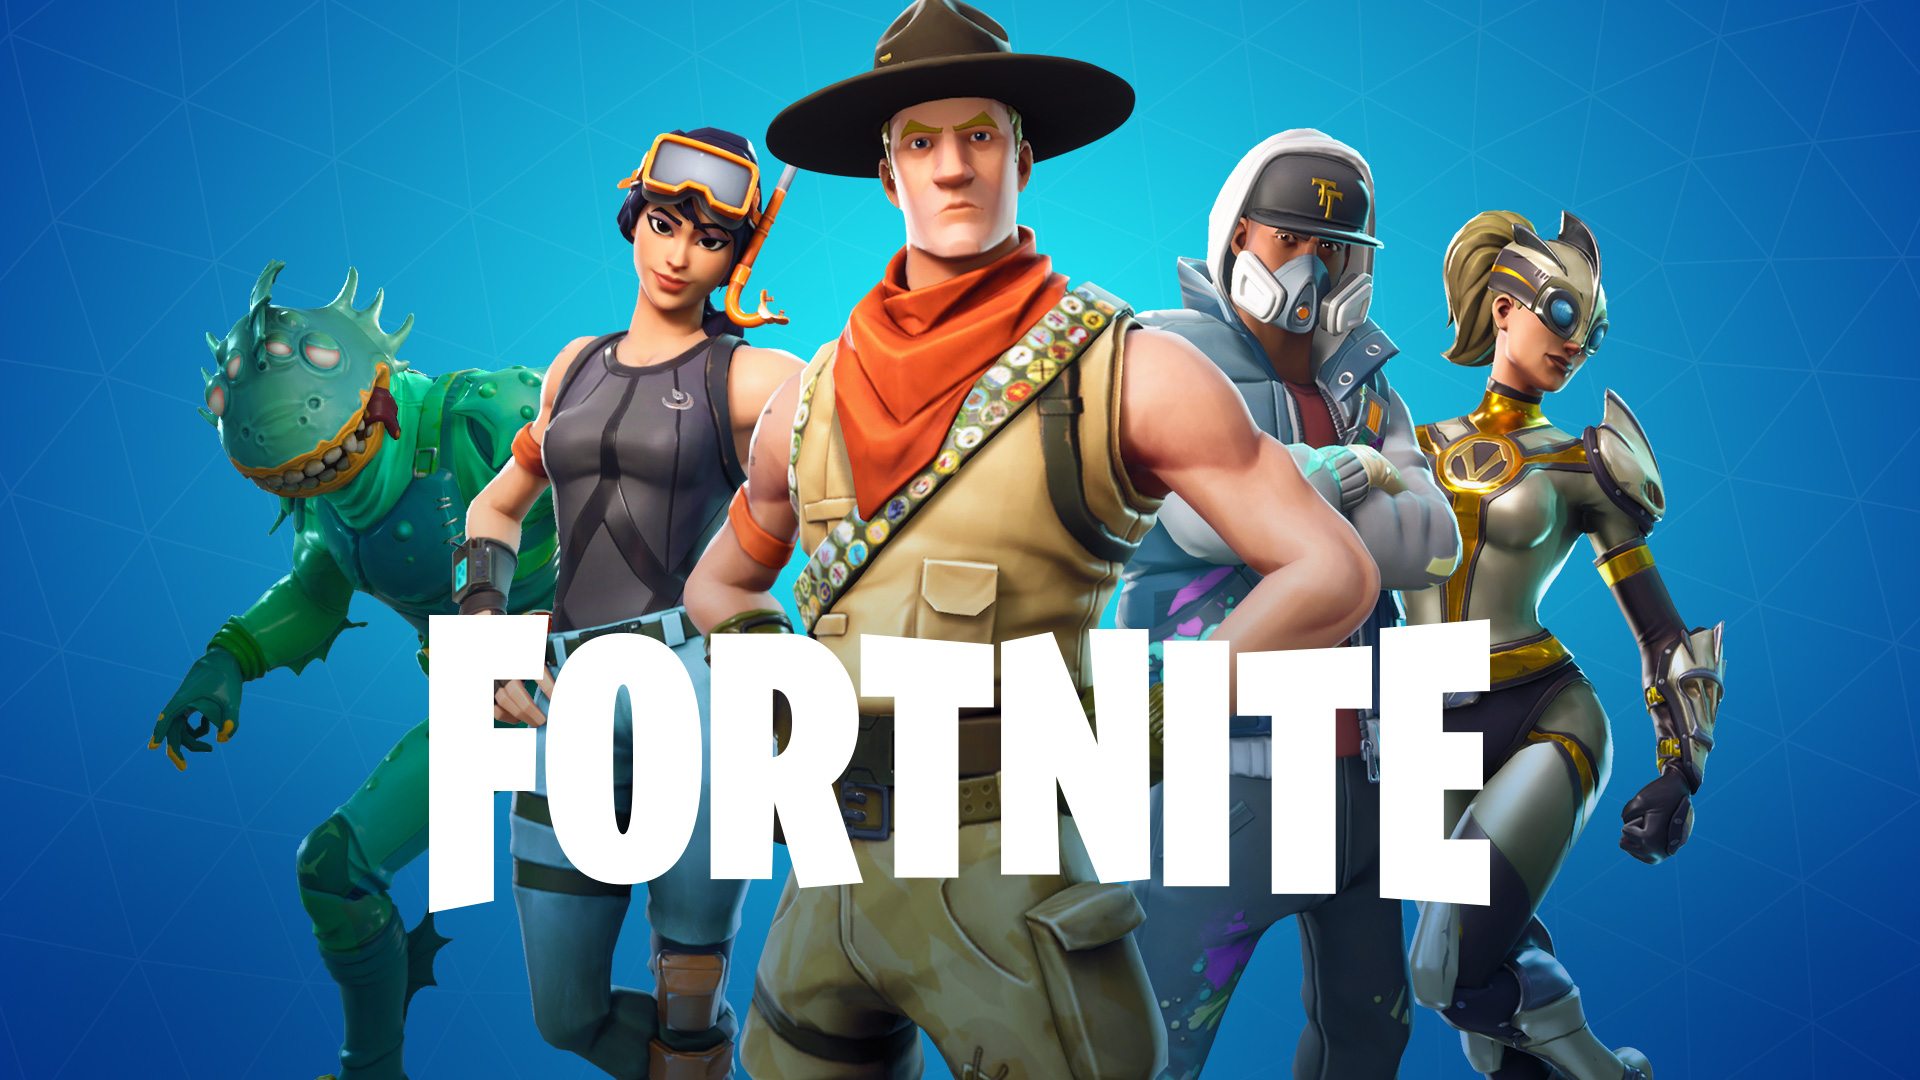 Wild West Mode and Dynamite Have Arrived in Fortnite - 1920 x 1080 jpeg 465kB